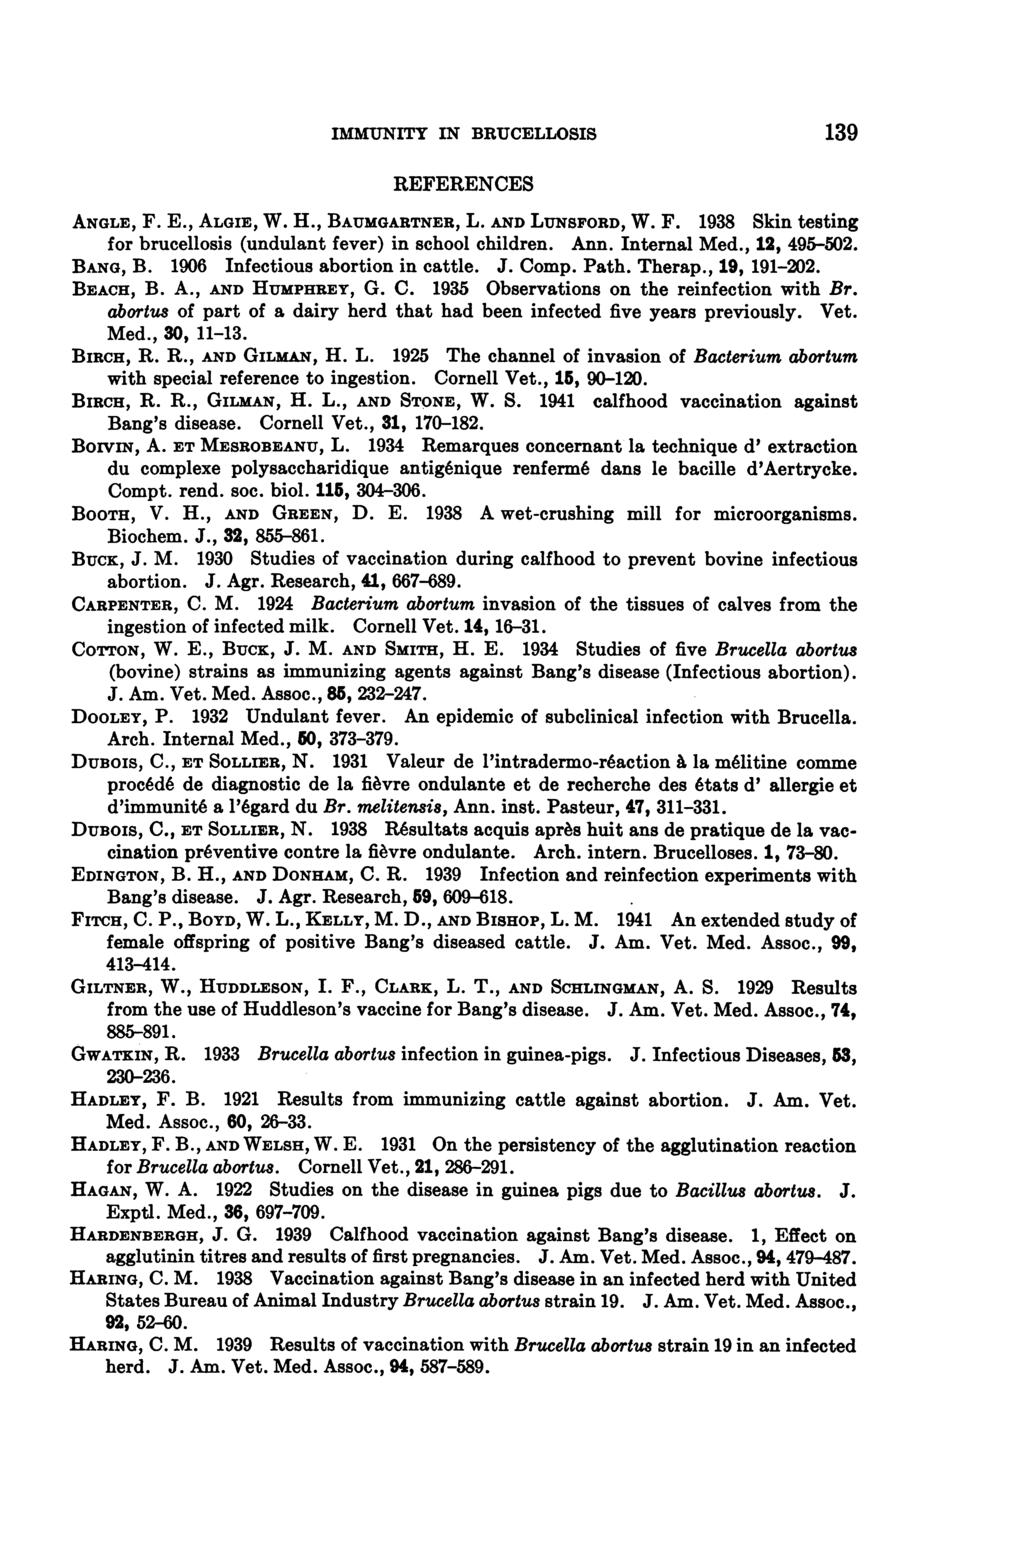 IMMUNITY IN BRUCELLOSIS 139 REFERENCES ANGLE, F. E., ALGIE, W. H., BAUMGARTNER, L. AND LUNSFORD, W. F. 1938 Skin testing for brucellosis (undulant fever) in school children. Ann. Internal Med.